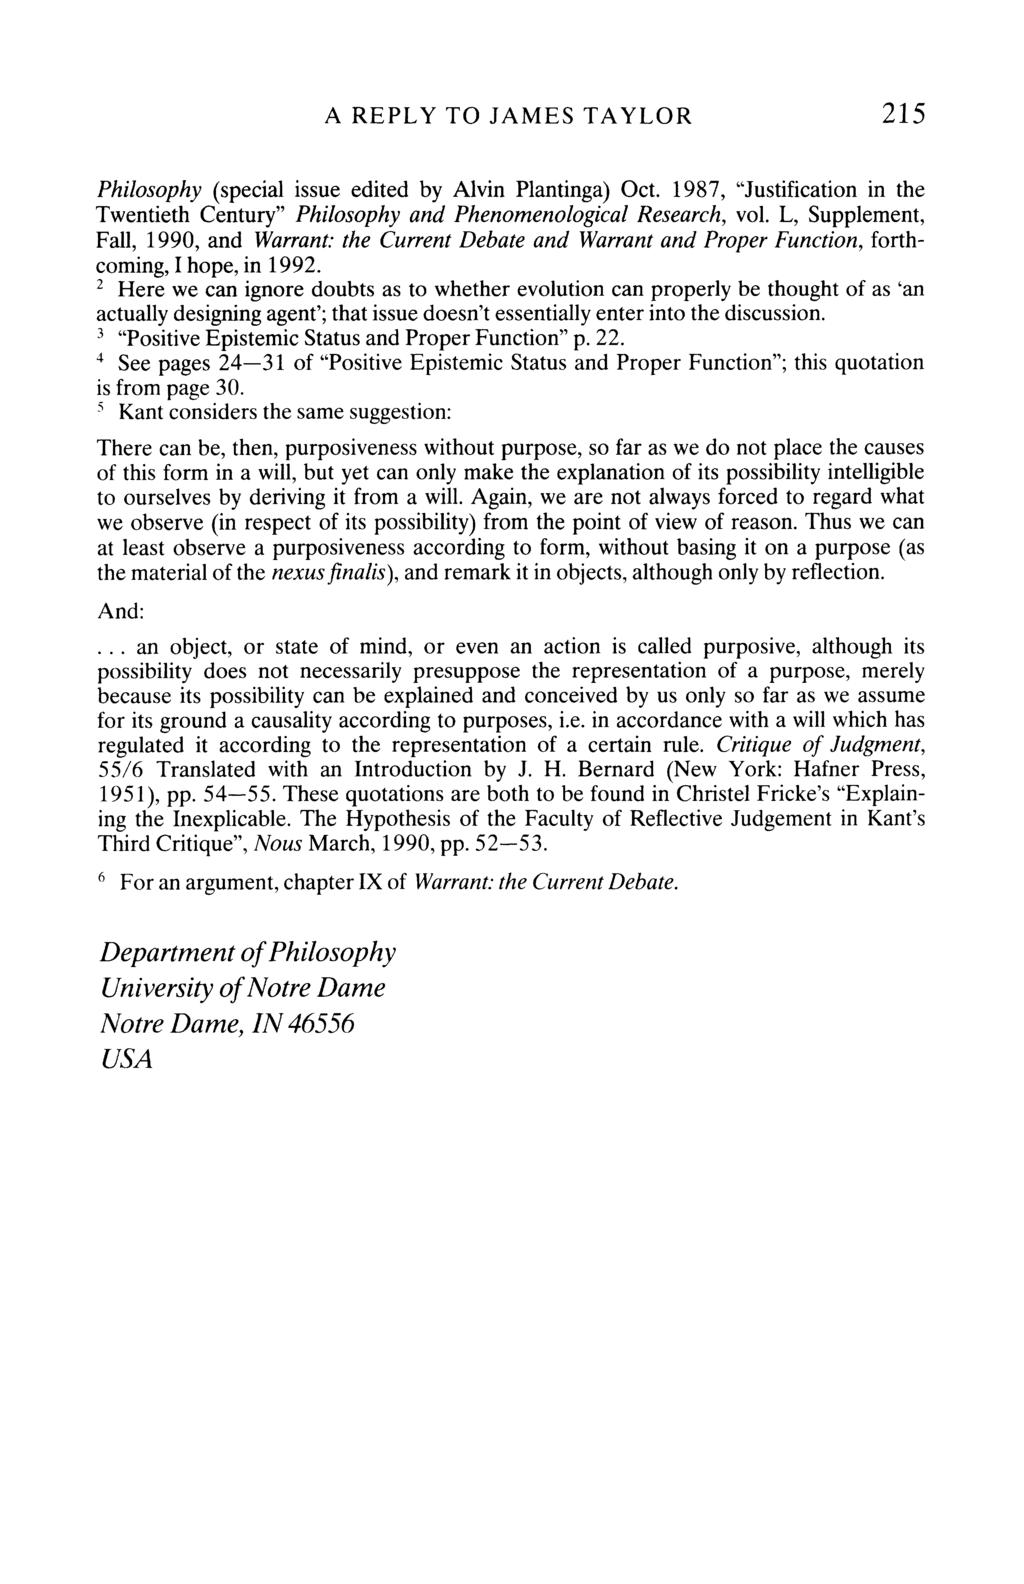 A REPLY TO JAMES TAYLOR 215 Philosophy (special issue edited by Alvin Plantinga) Oct. 1987, "Justification in the Twentieth Century" Philosophy and Phenomenological Research, vol.